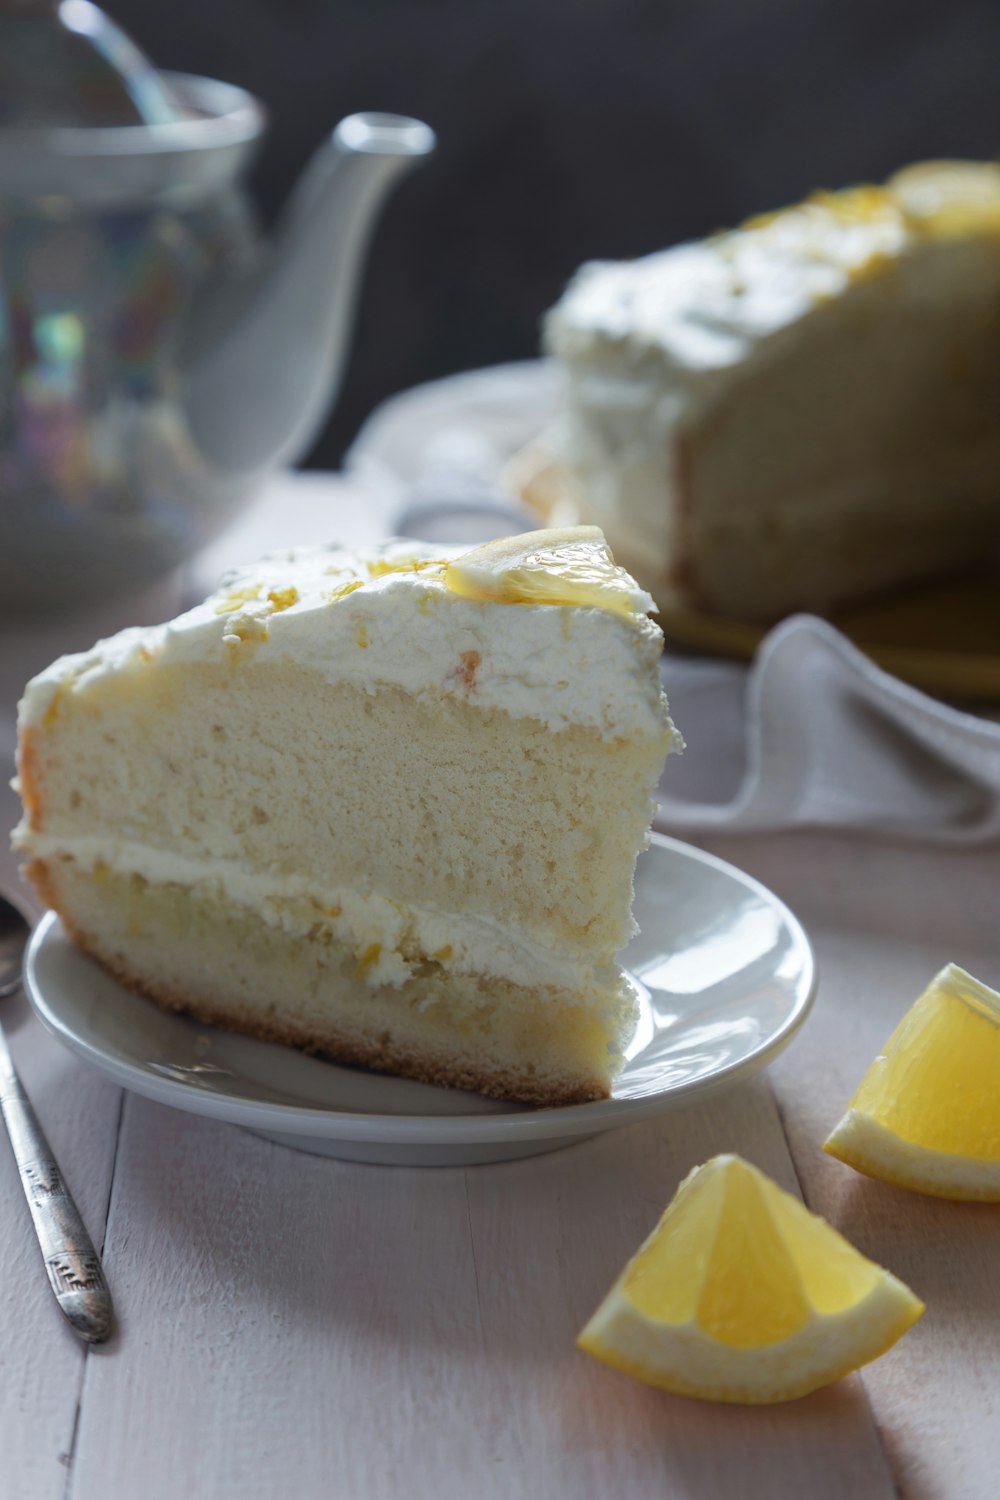 a slice of cake on a plate with lemon wedges